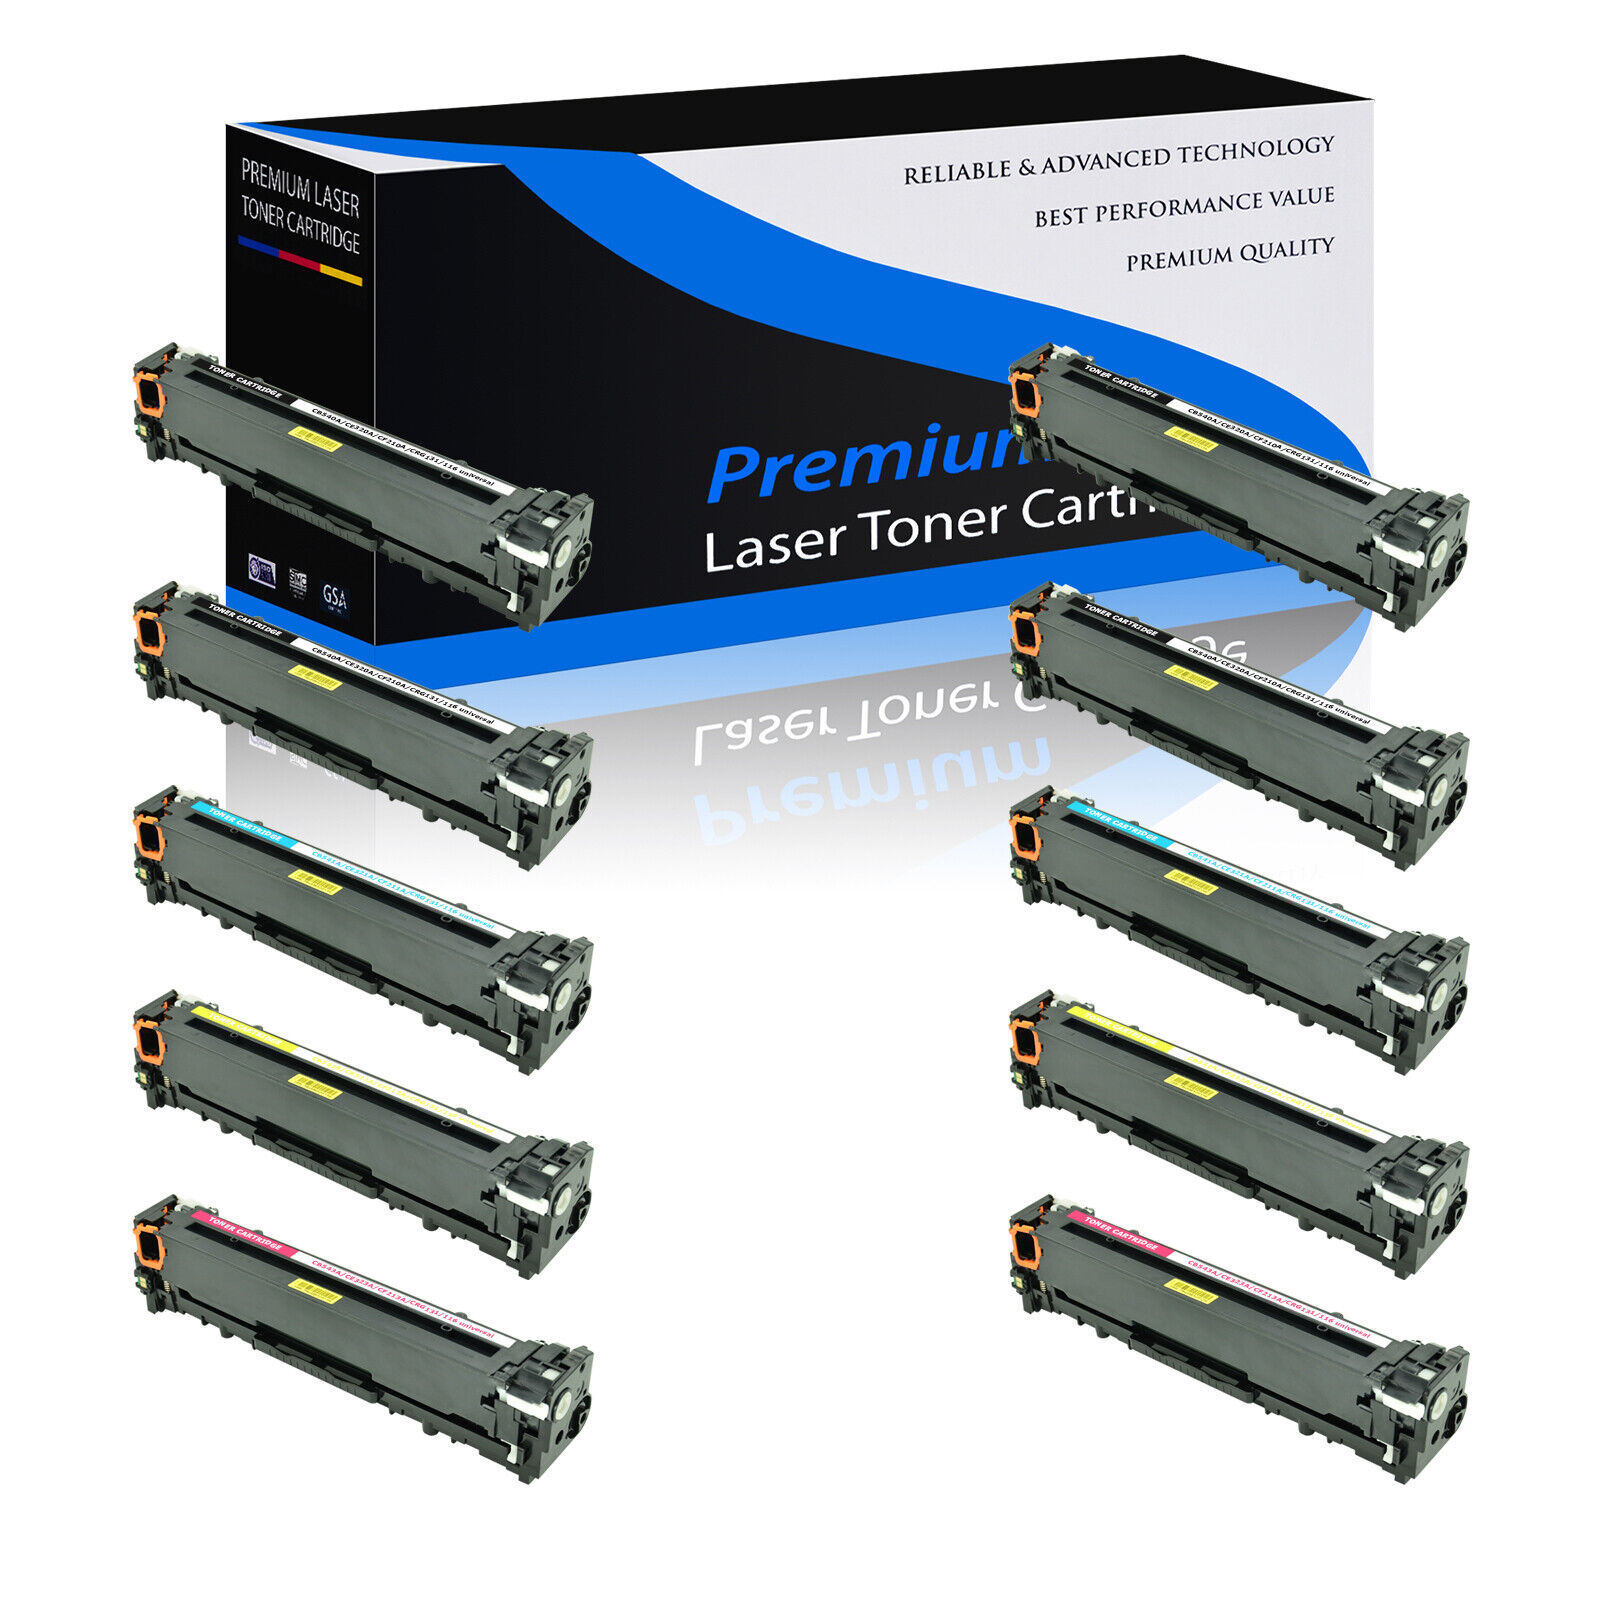 10PK BK/C/Y/M CE320A -CE323A 128A Toner For HP LaserJet Pro CM1415FNW CP1525NW